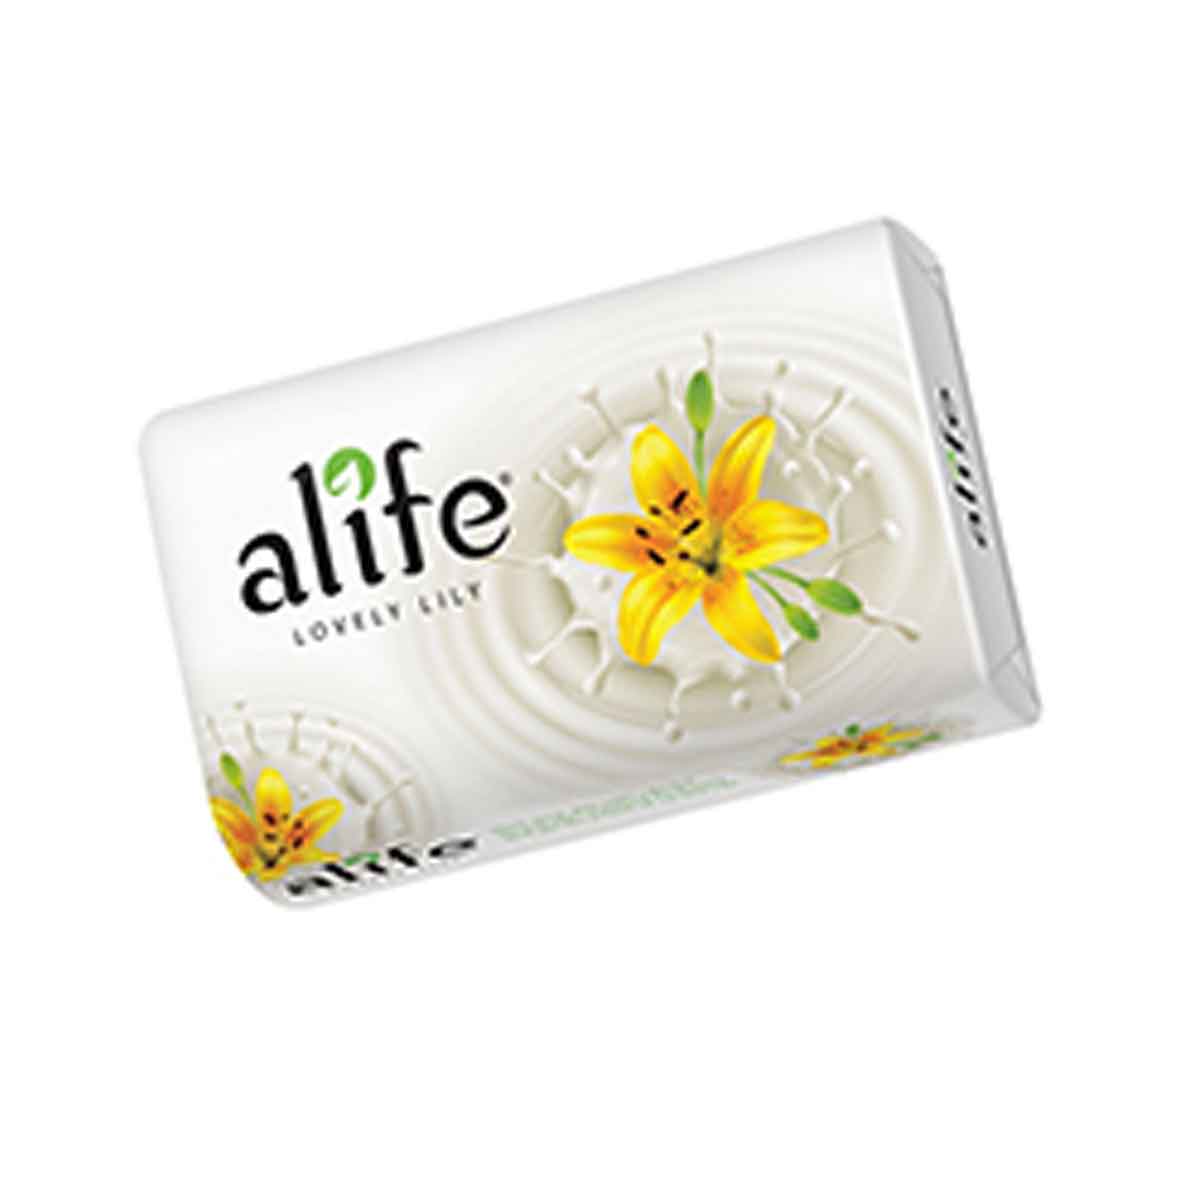 FORTUNE ALIFE LIVELY LILY SOAP - 4 X 75 GMS